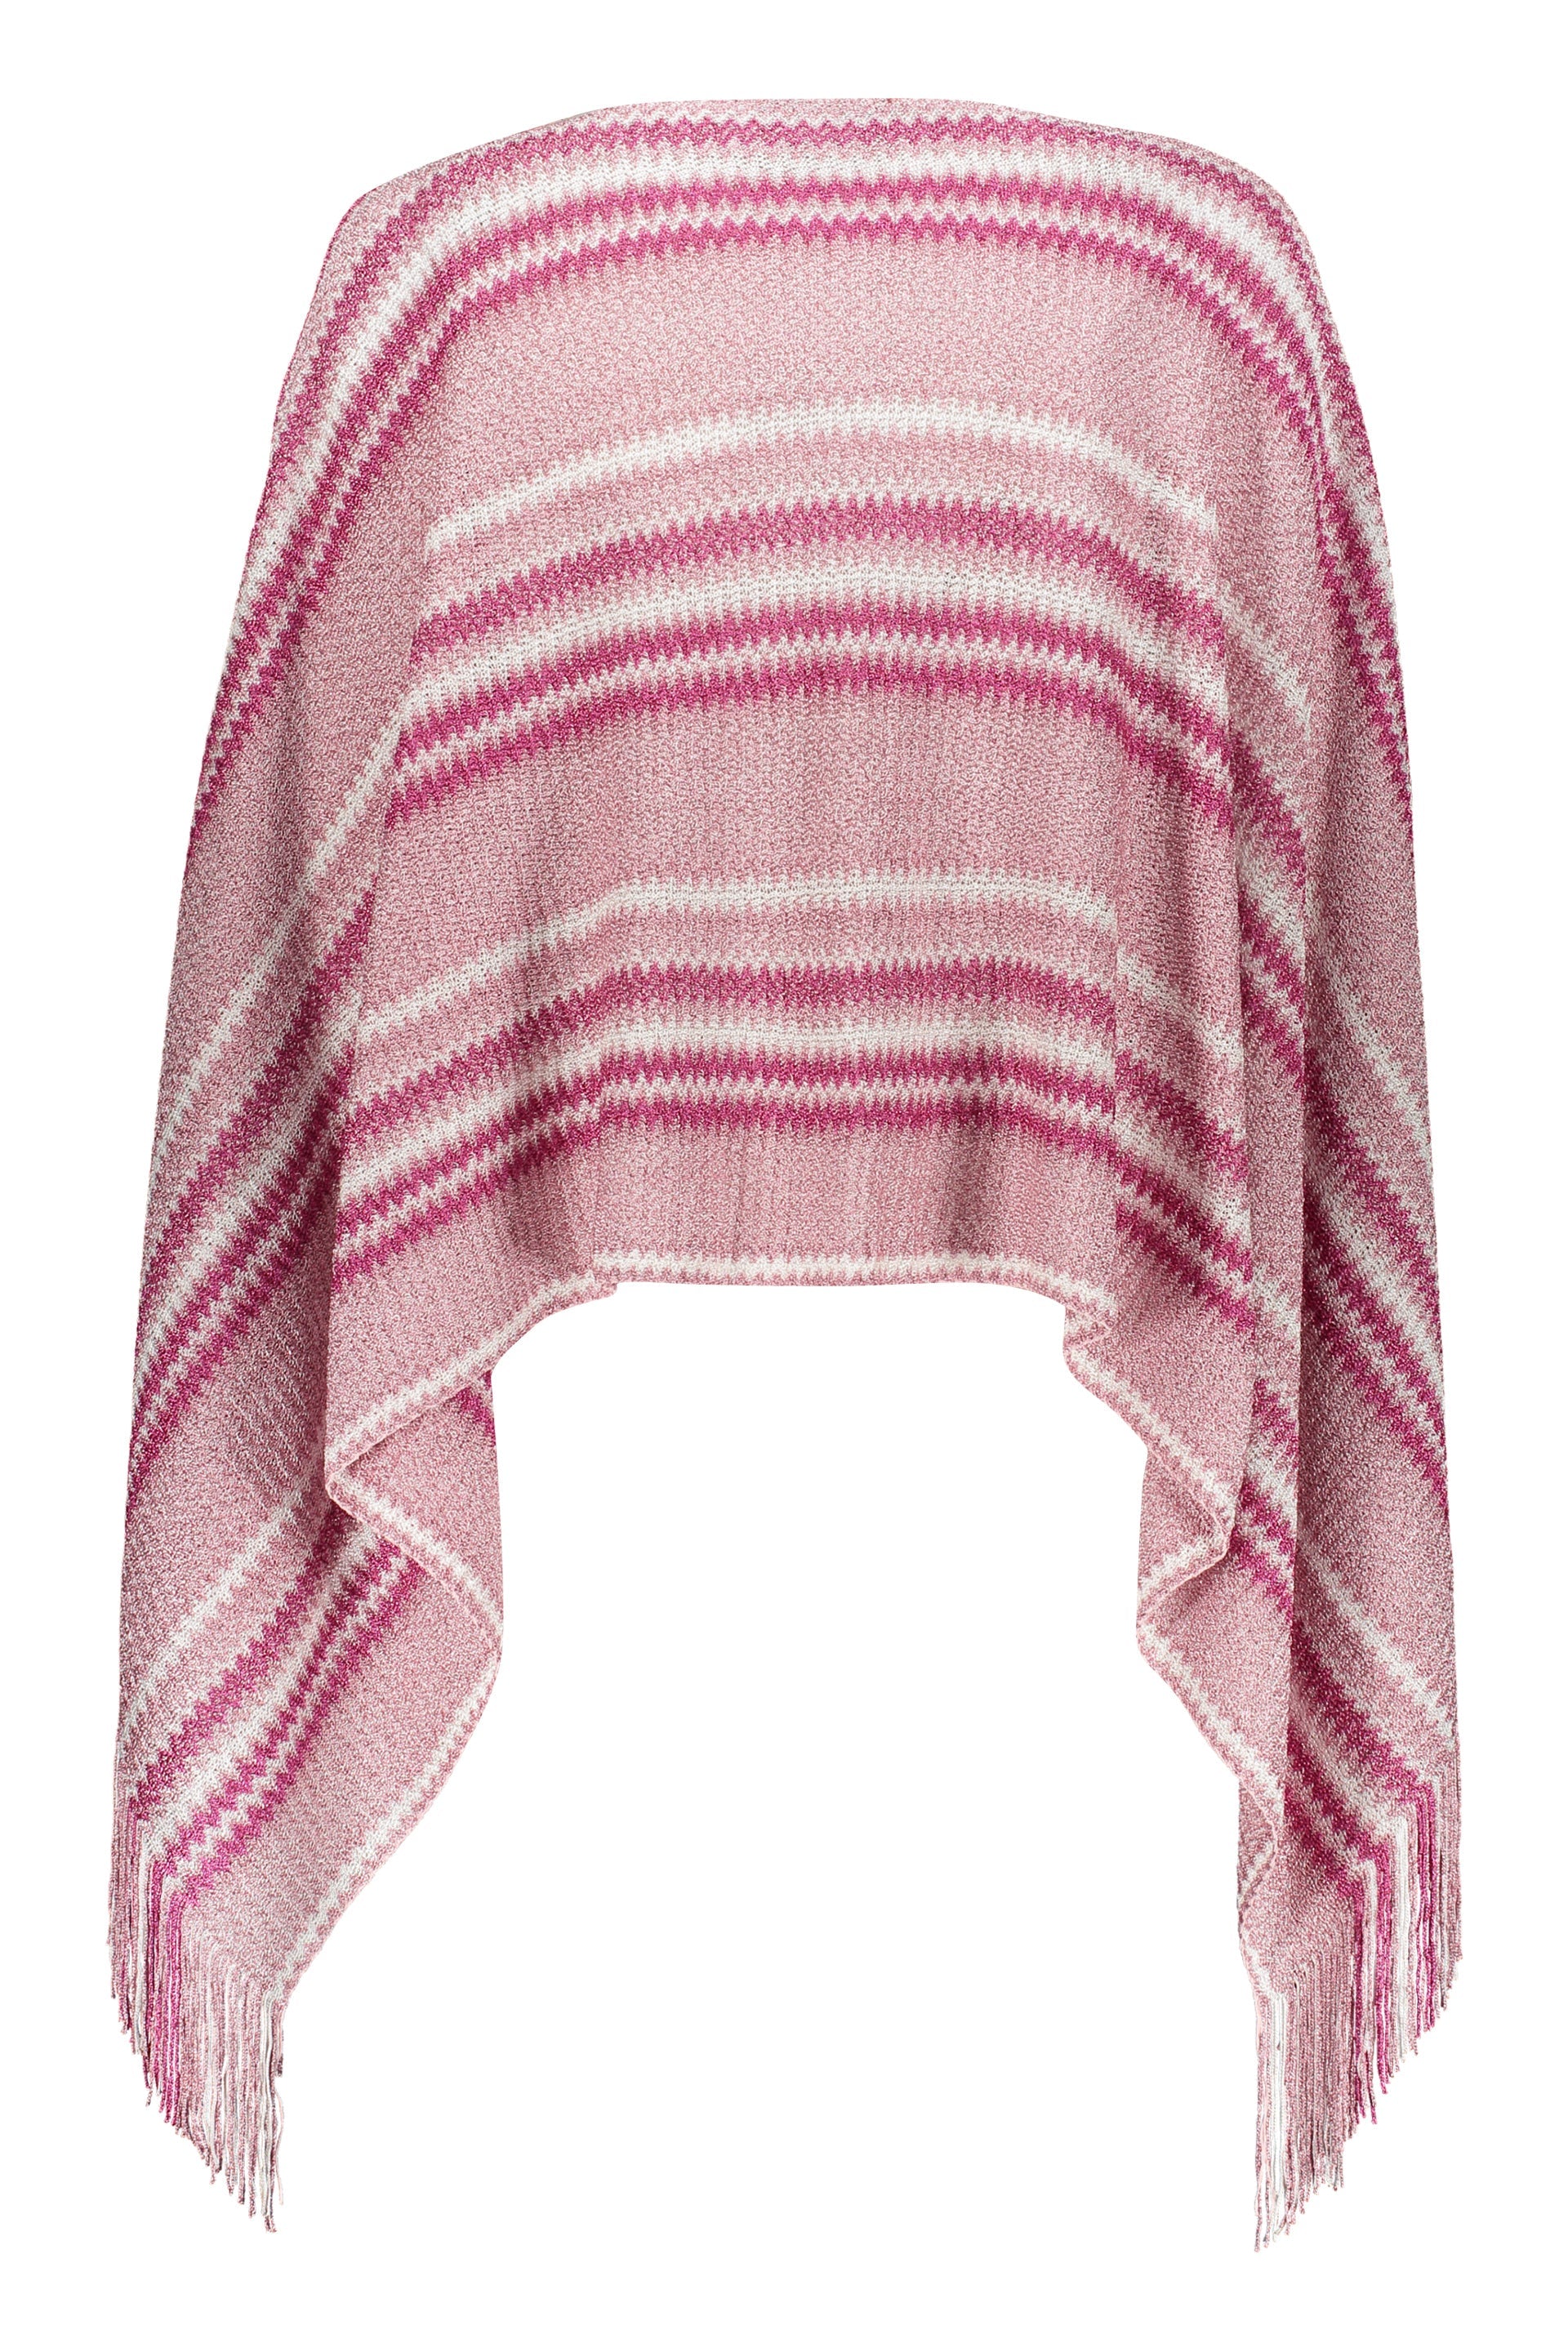 Missoni-OUTLET-SALE-Fringed-knit-poncho-Jacken-Mantel-TU-ARCHIVE-COLLECTION-2_29047122-6b1f-4b61-aa5c-d742daddee24.jpg